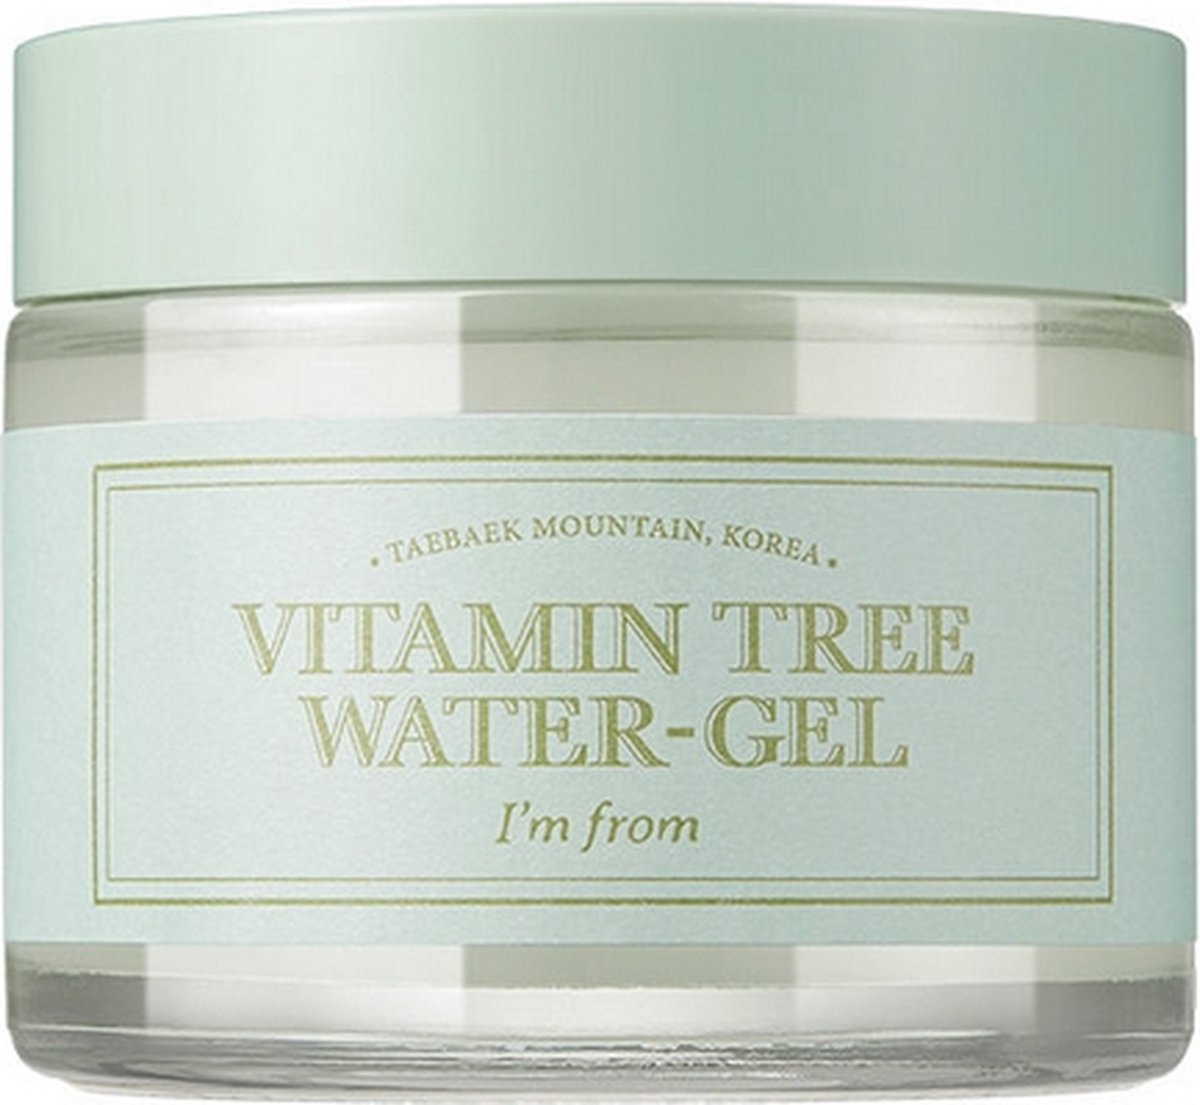 I'm From Vitamin Tree Water-Gel 75 g 75g